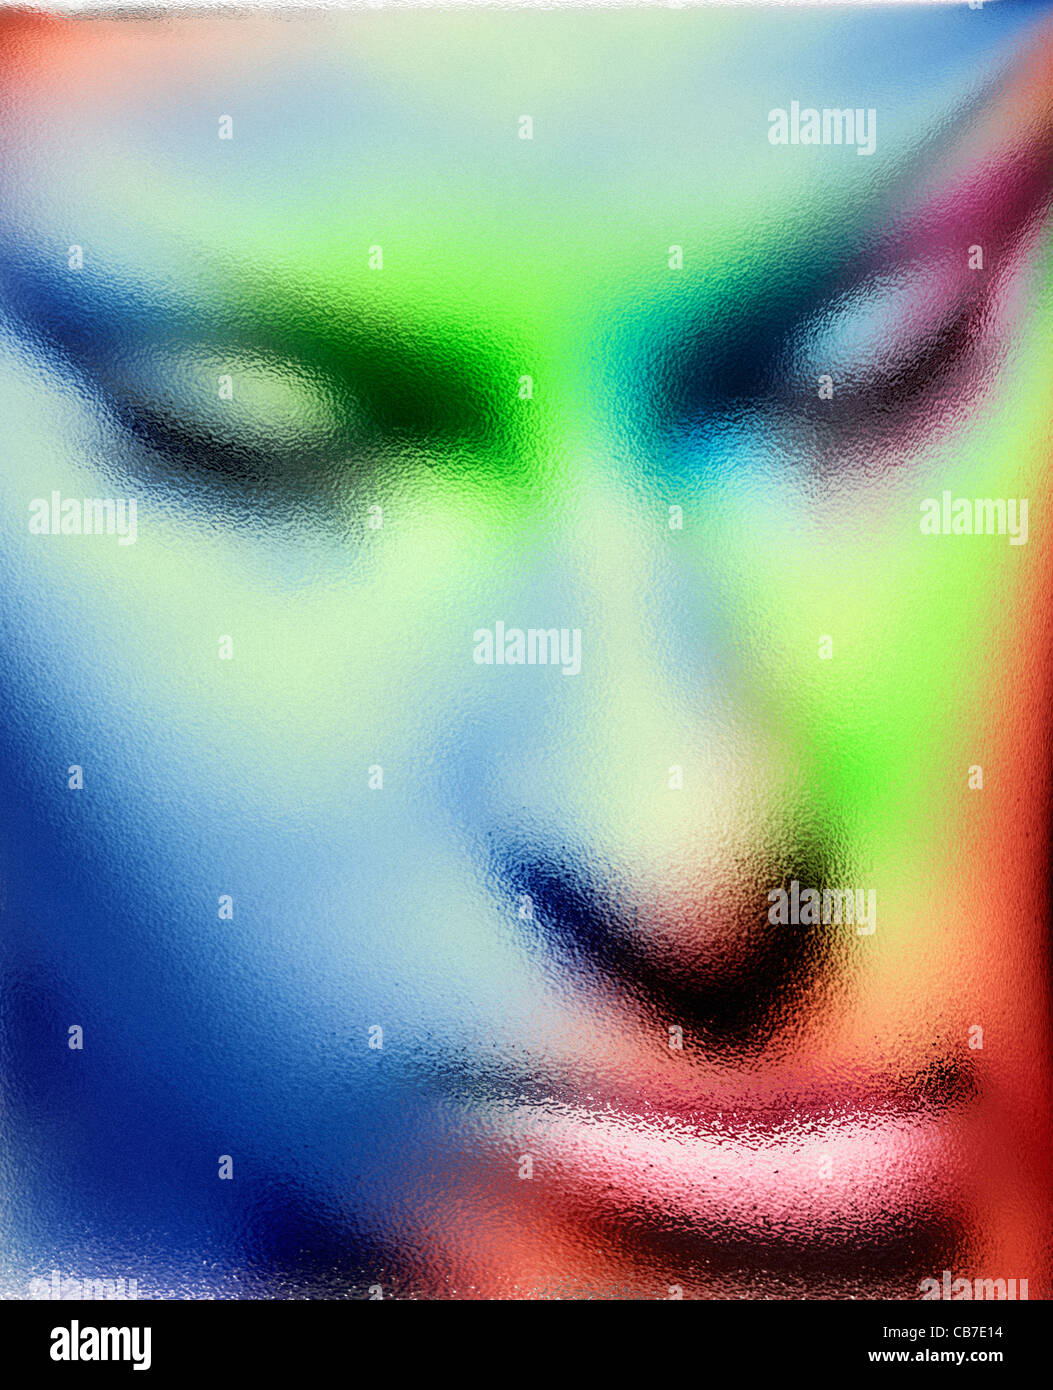 distorted dreaming colourful face through wavy glass Stock Photo